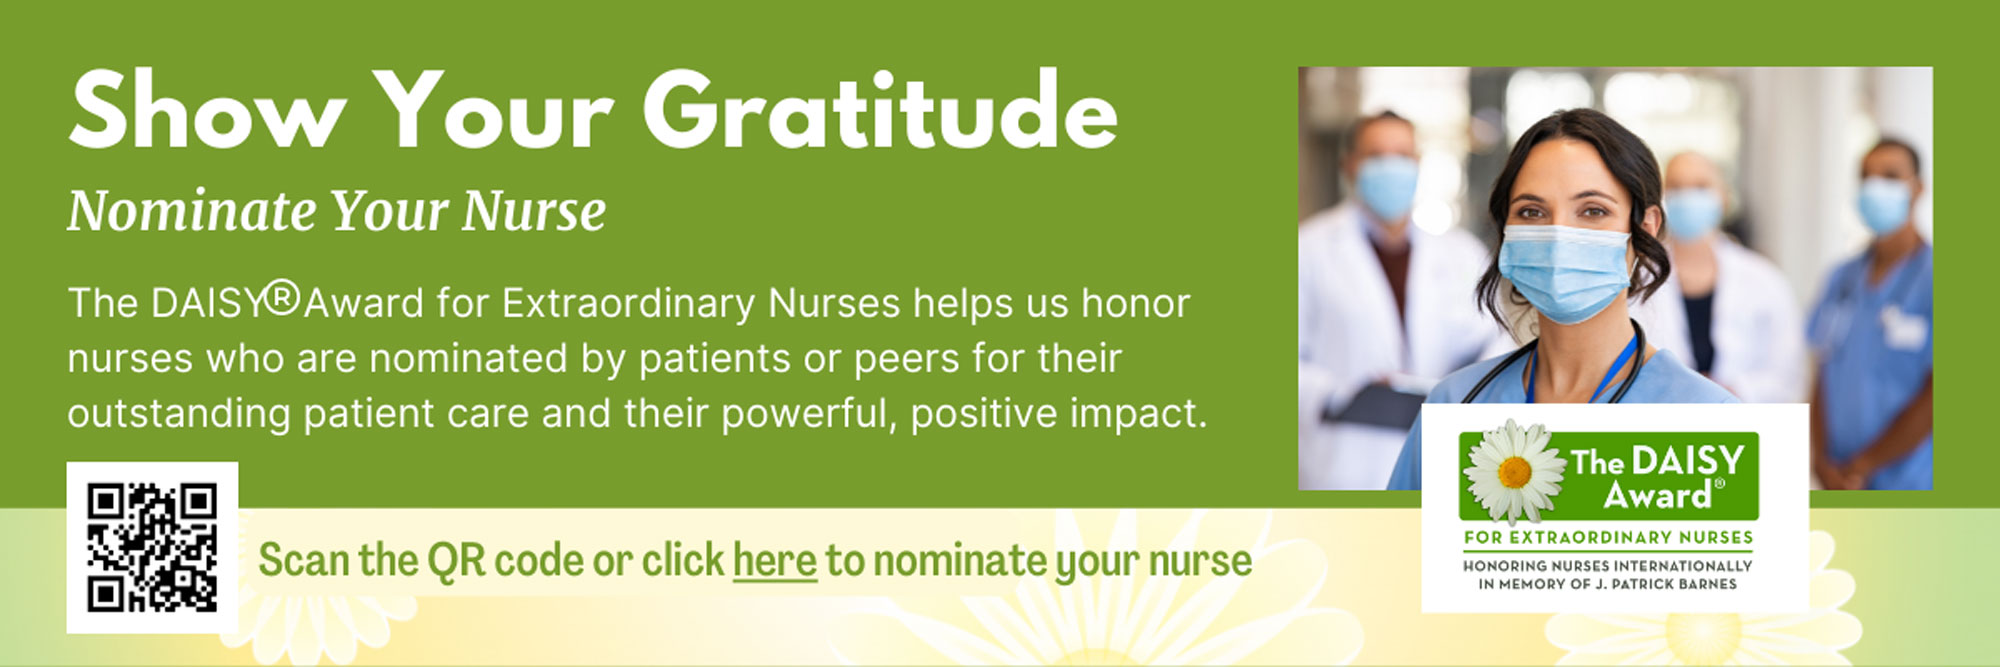 Show Your Gratitude 
Nominate Your Nurse

The DAISY Award for Extraordinary Nurses helps us honor nurses who are nominated by patients or peers for their outstanding patient care and their powerful, positive impact.

Scan the QR code or click here to nominate your nurse

The DAISY Award
FOR EXTRAORDINARY NURSES INTERNATIONALLY IN MEMOMRY OF J. PATRICK BARNES